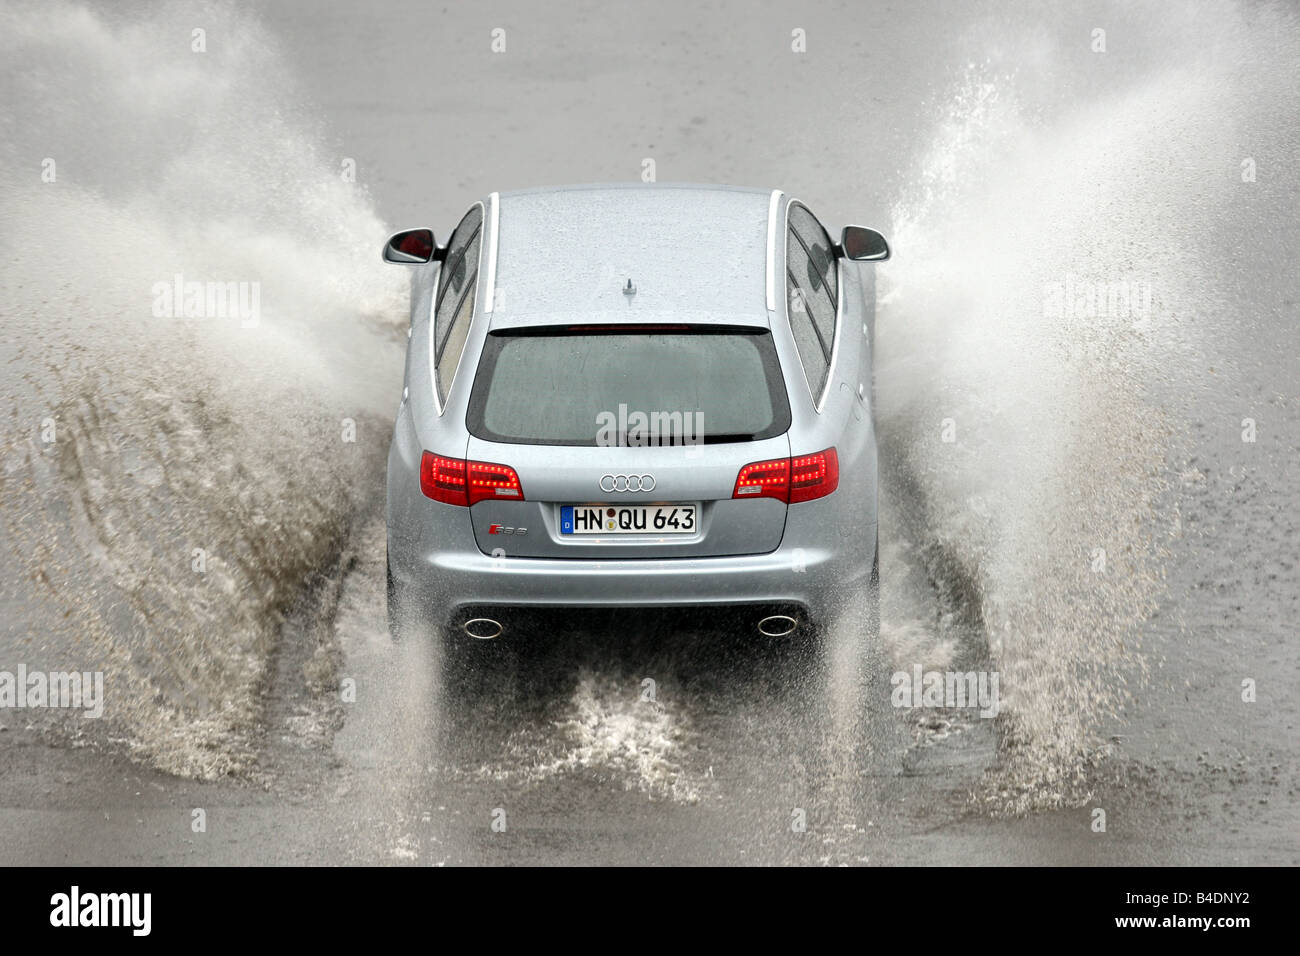 Audi RS6 Avant, model year 2008-, silver, driving, behind, rear view, test track, Water, Aquaplaning Stock Photo